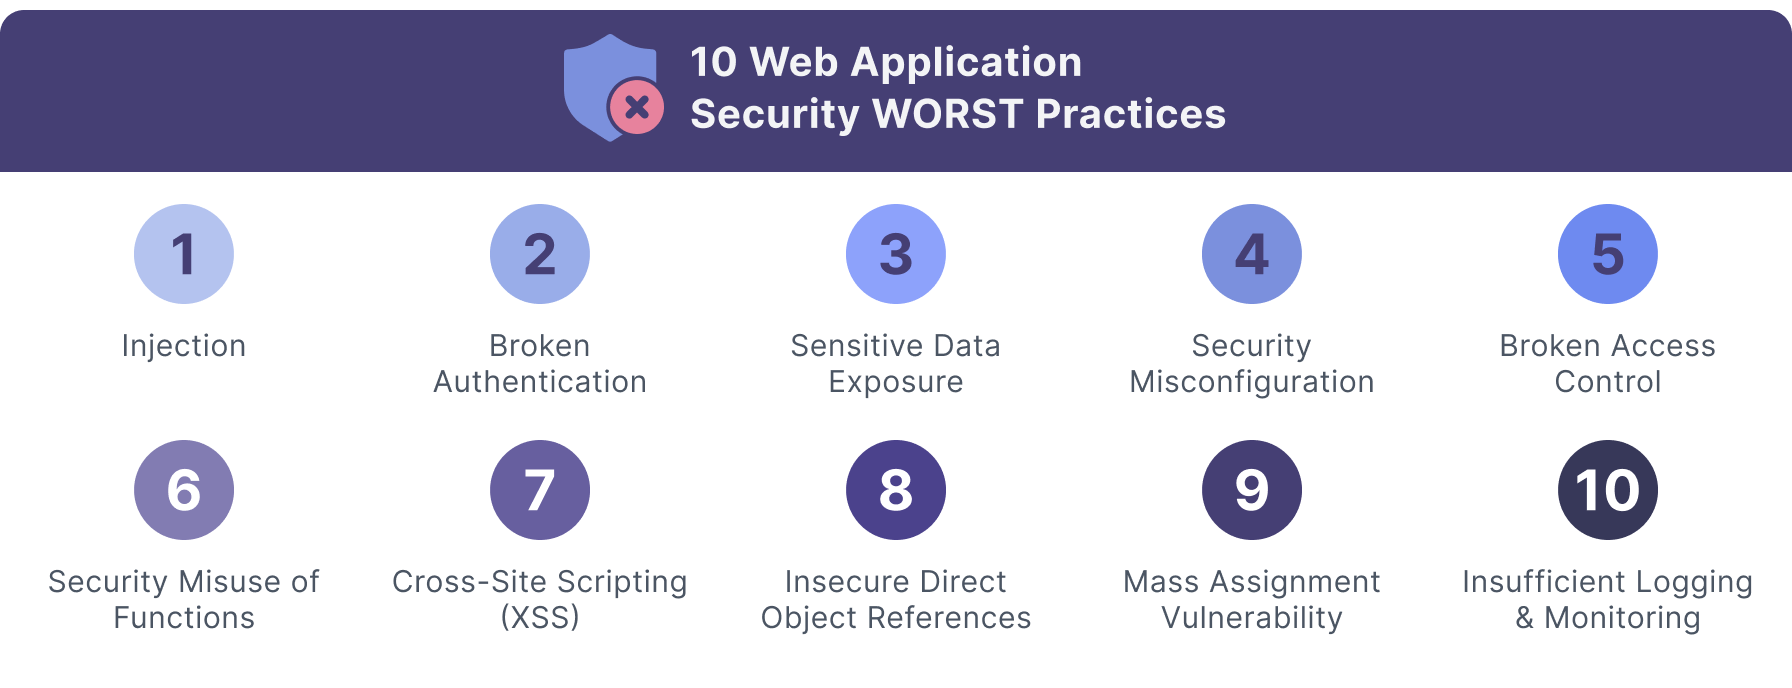 Web-Application-Security-WORST-Practices